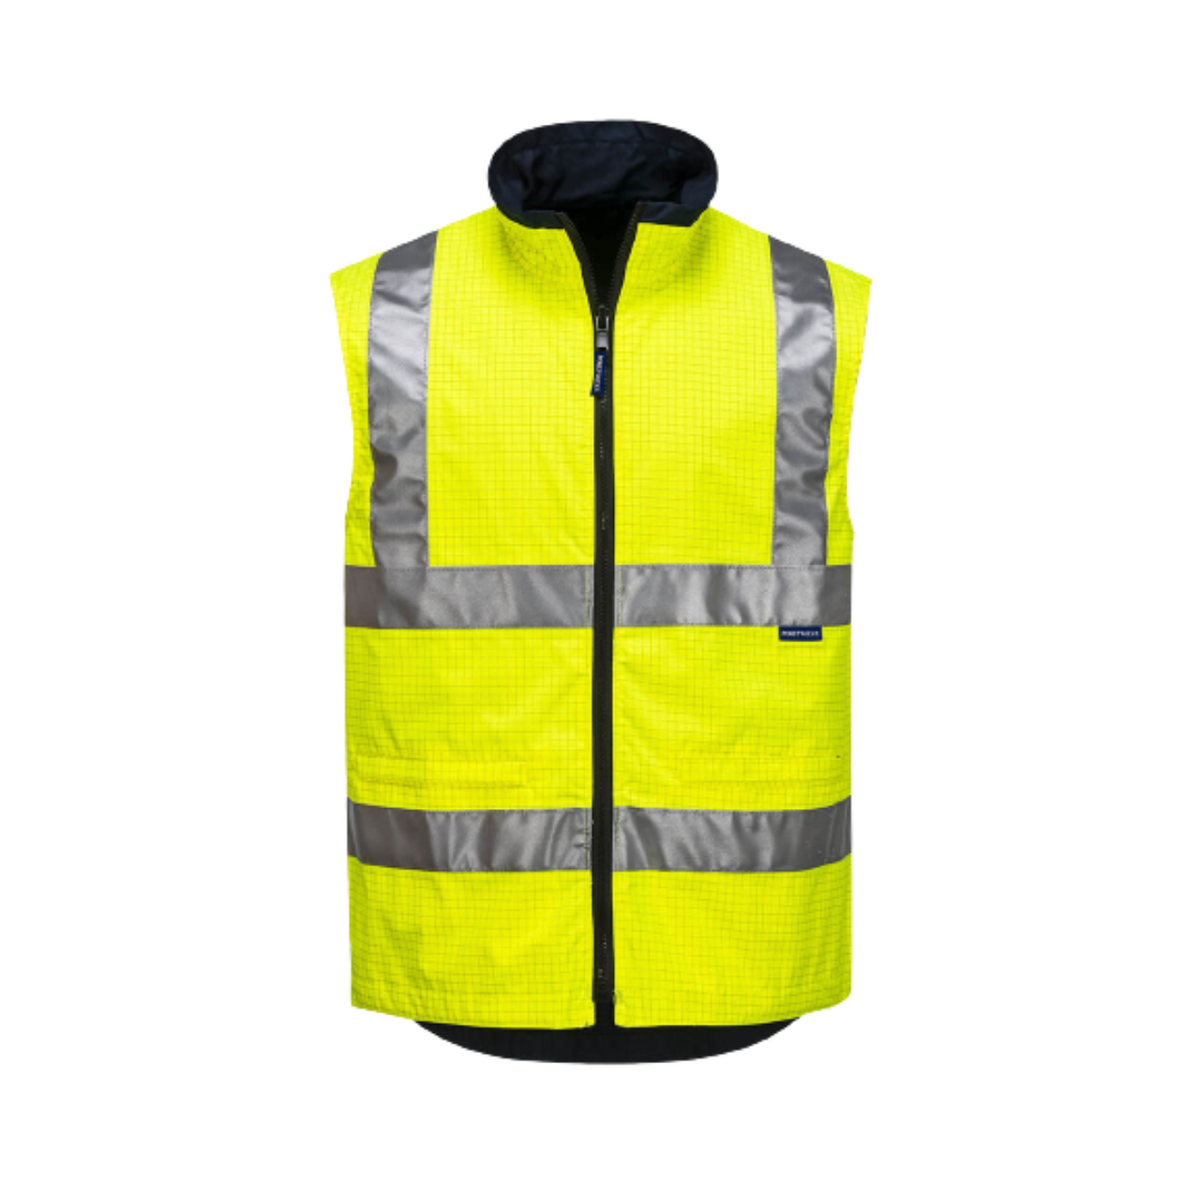 Portwest Antistatic Reversible Vest Reflective Taped Safety Work MA230-Collins Clothing Co